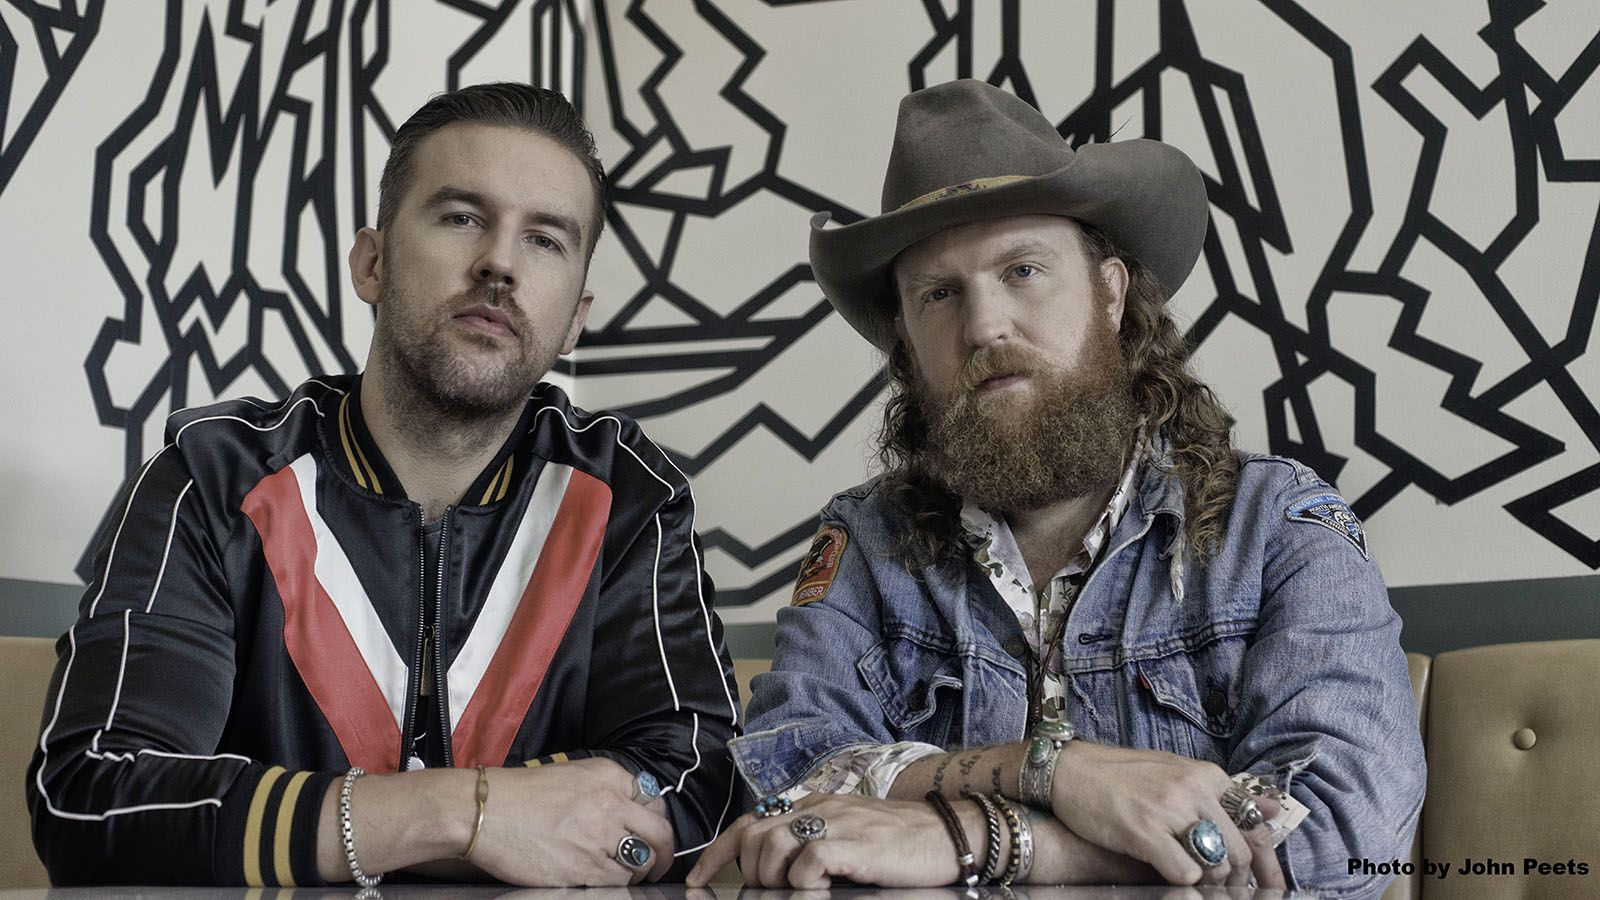 The sibling country duo Brothers Osborne will close out the Summer Concert Series at Sylvan Cellars in Rome City on Saturday, July 20.